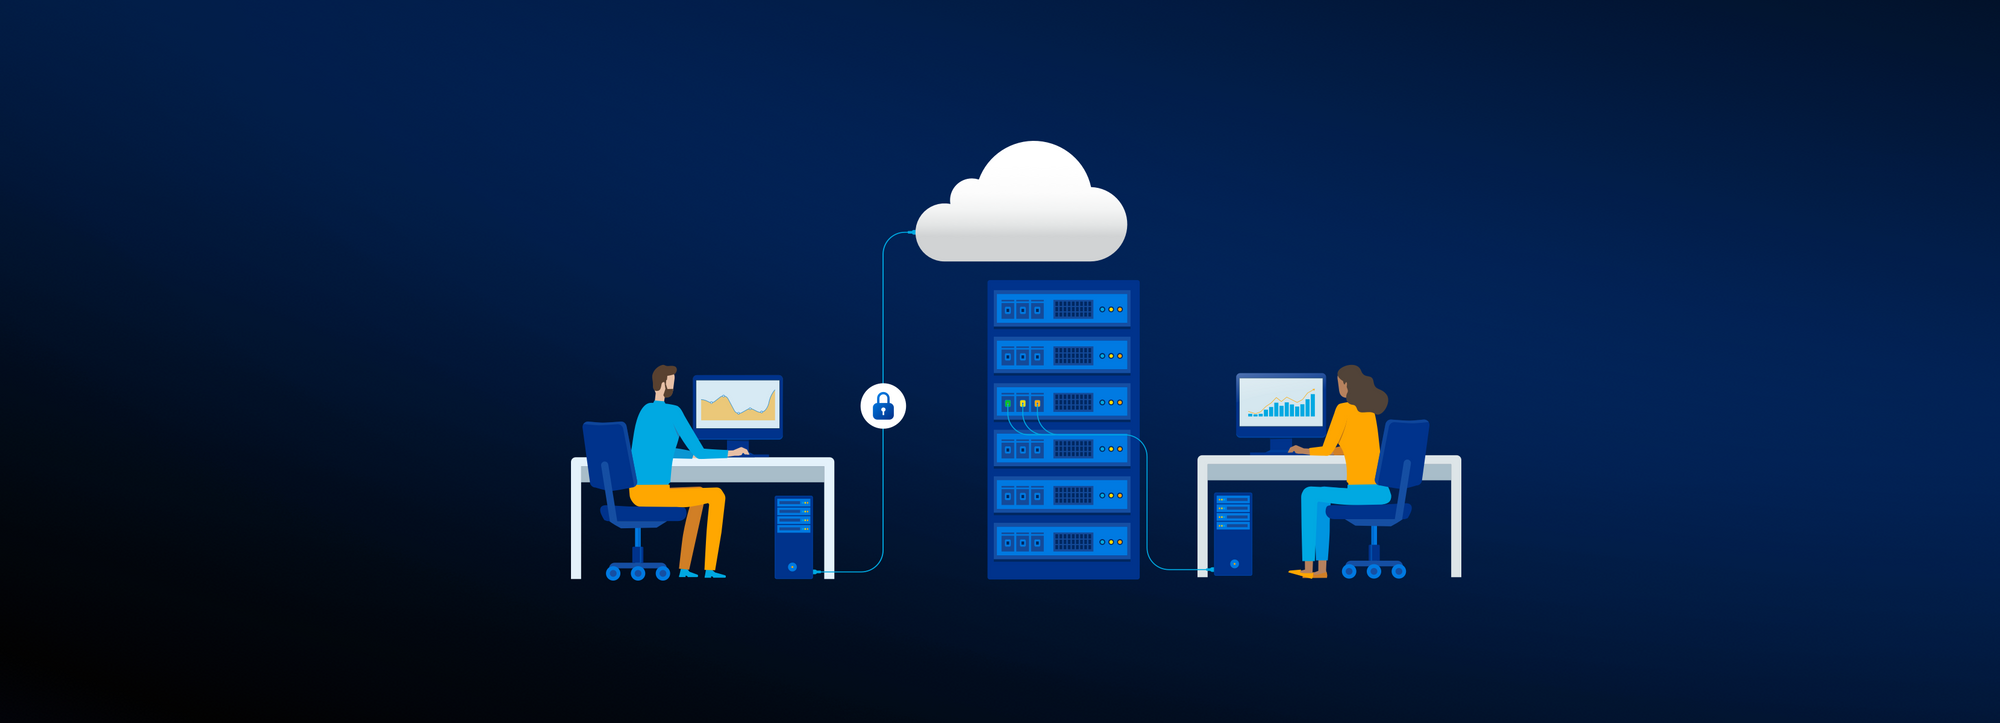 On-premises vs cloud deployment: can you get the best of both worlds?